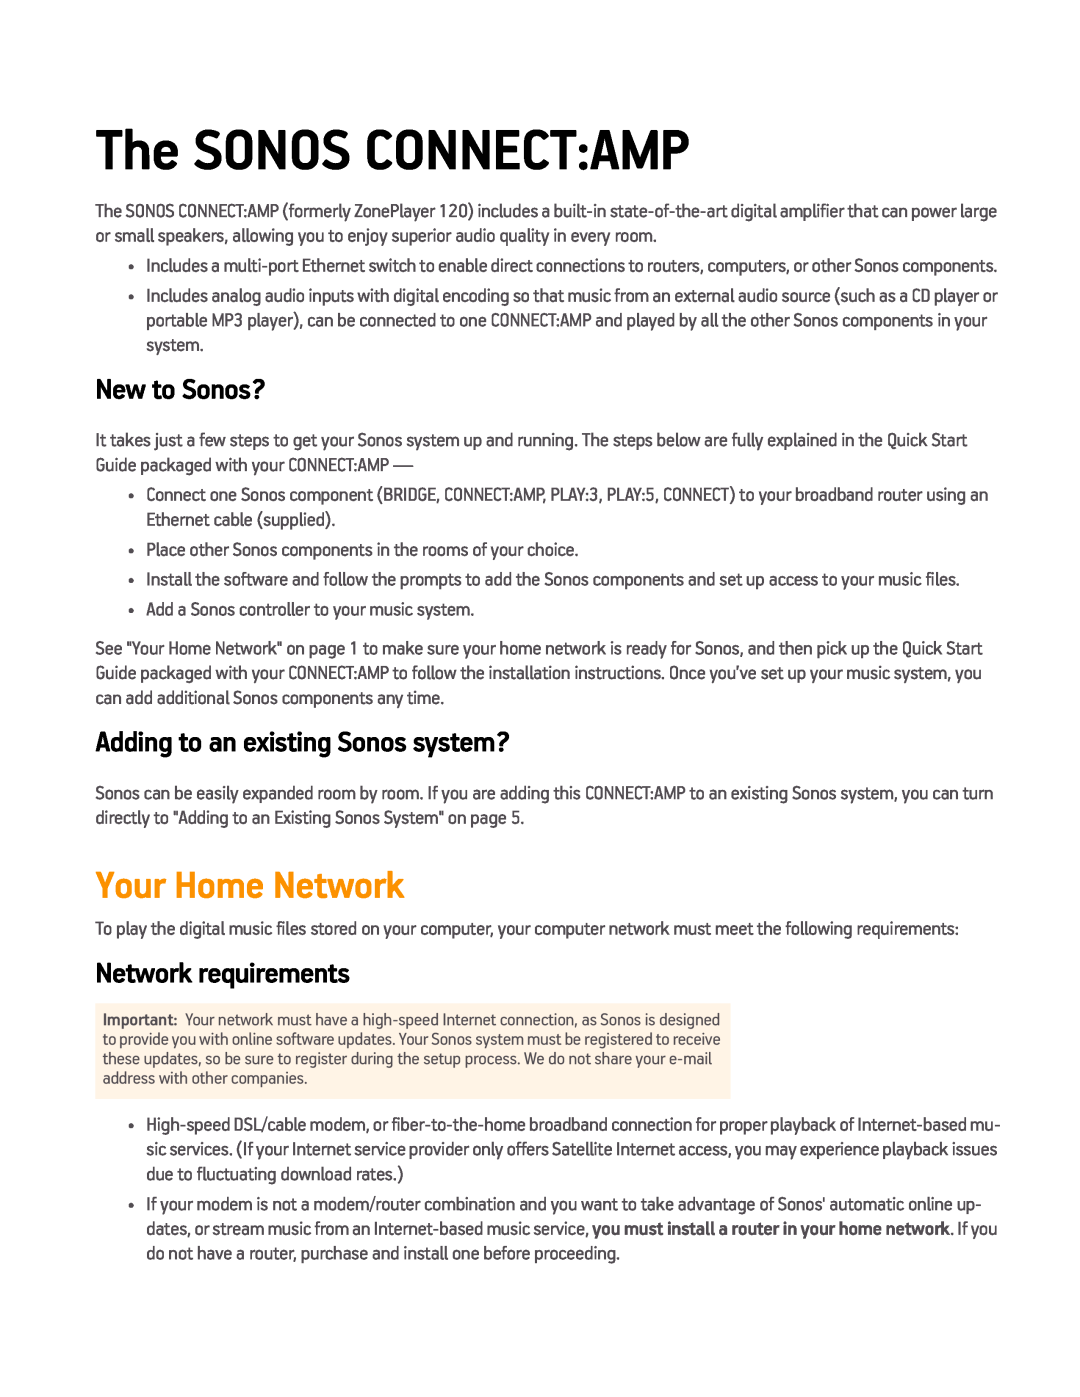 Sonos CONNECTAMP manual Your Home Network, New to Sonos?, Adding to an existing Sonos system?, Network requirements 